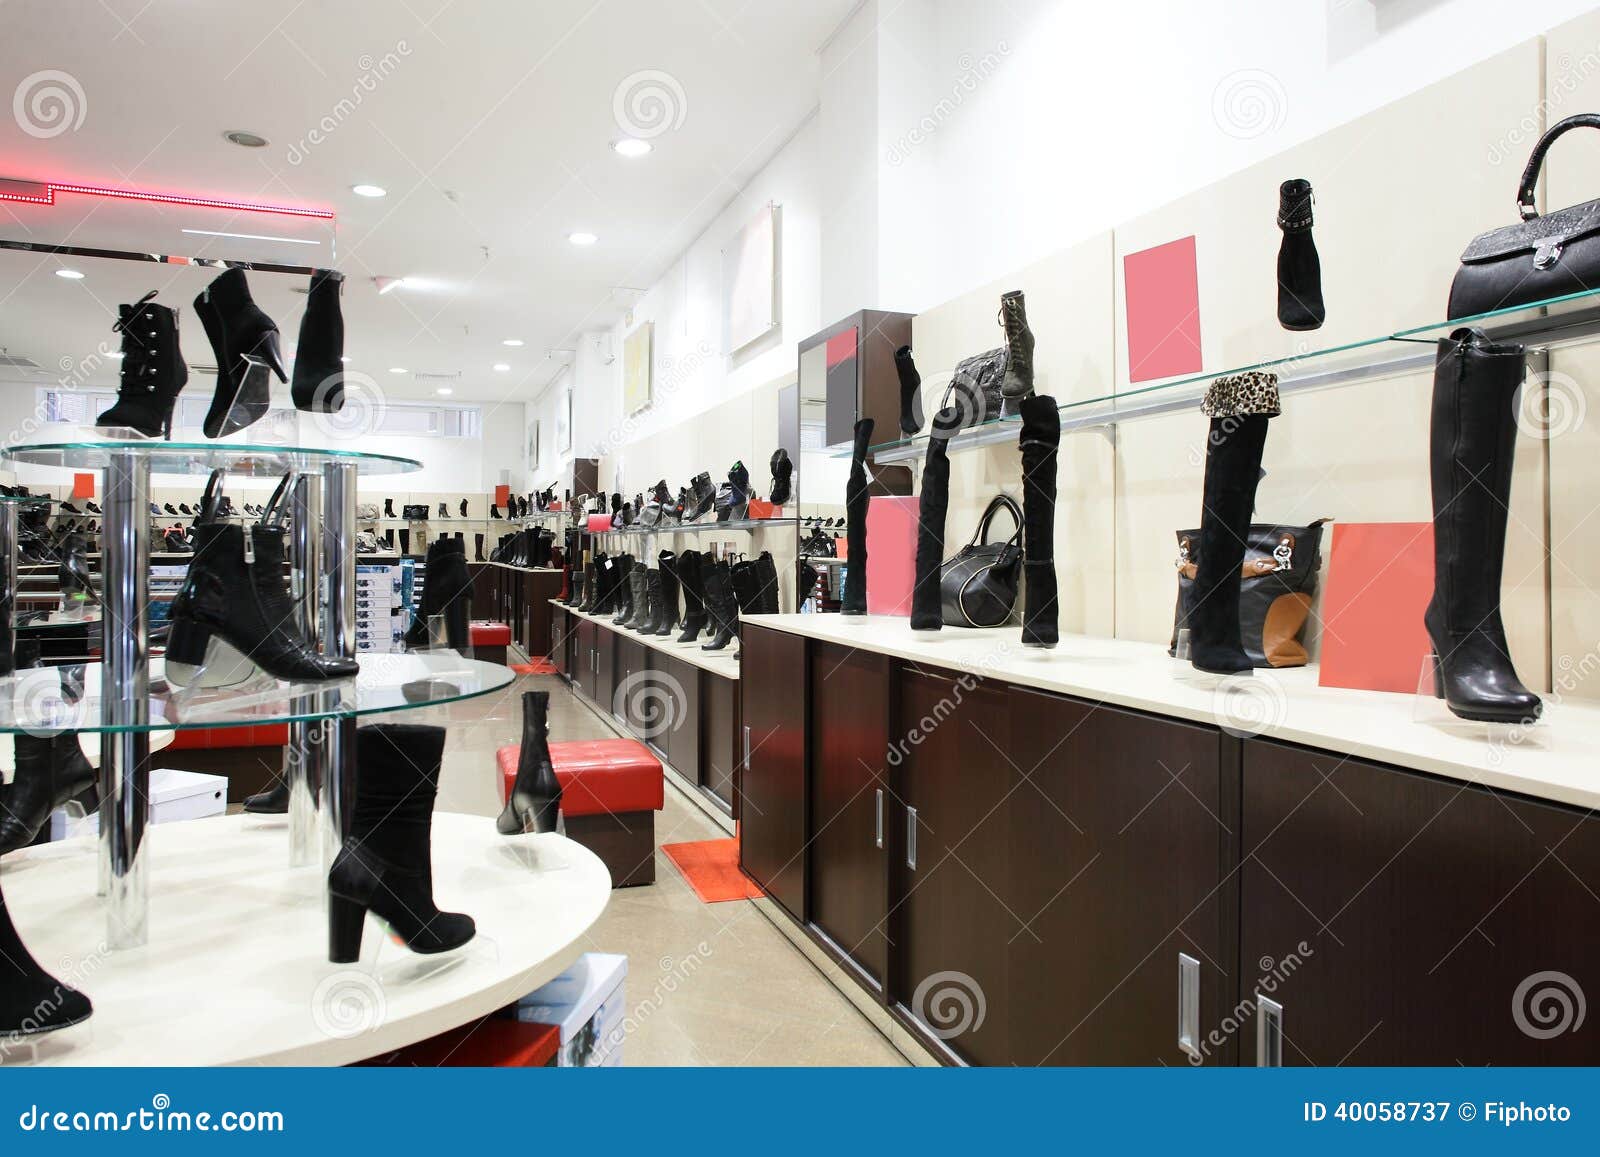 Interior Of Shoe Store In Modern European Mall Stock Image